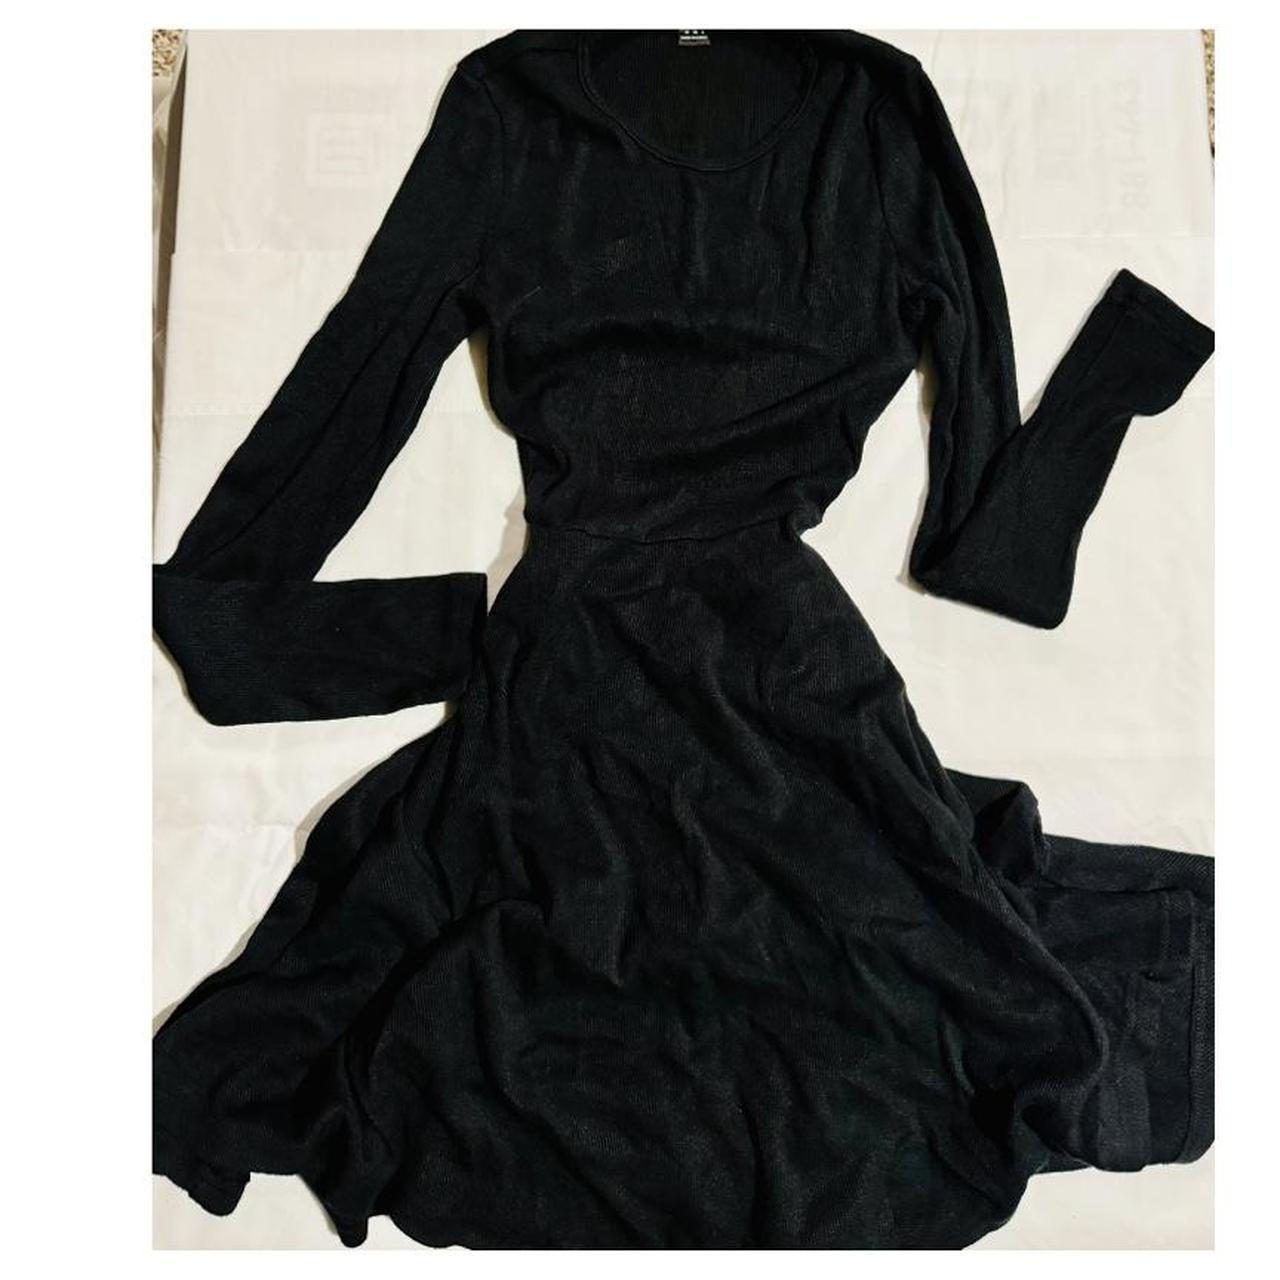 Women's Shein Dresses, Preowned & Secondhand